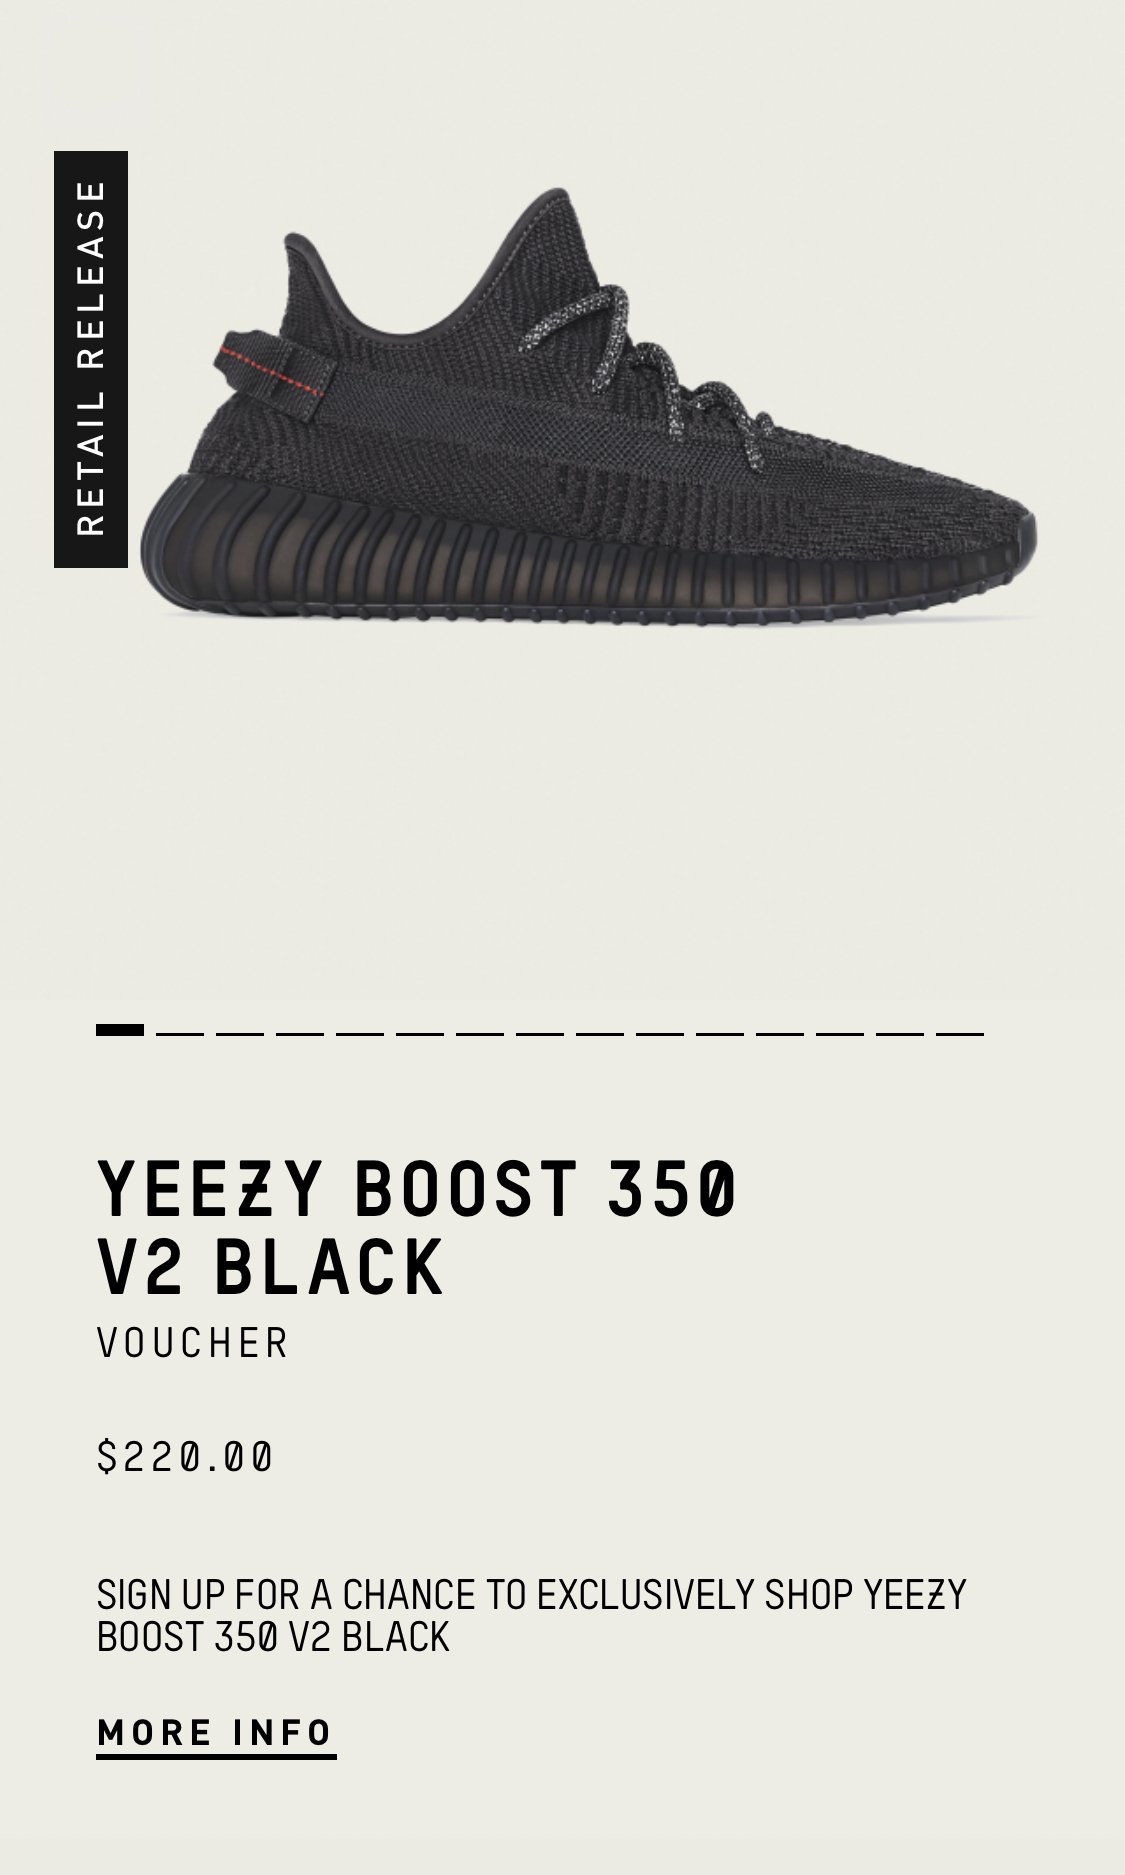 Uitgaand Rouwen Lengtegraad adidas alerts on Twitter: "Registration for the Black Yeezy Boost 350 V2 is  now available on the adidas app. Reservations for in-store pickup go live  Tuesday, June 4. GET THE APP https://t.co/zczOYXfGTo #